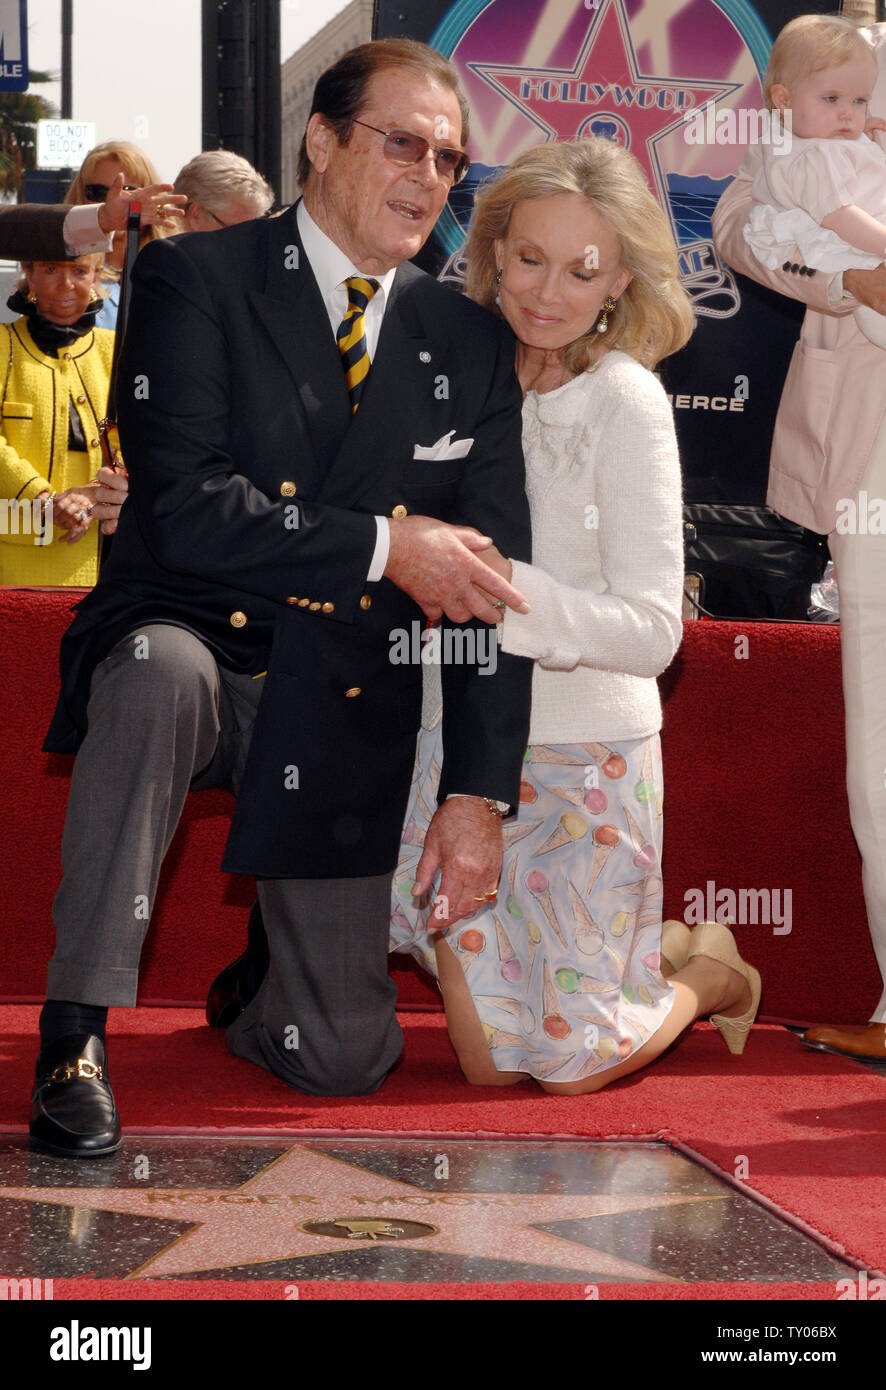 British actor Sir Roger Moore (L) and his wife, actress Christina Tholstrup pose during an unveiling ceremony honoring him with the 2,350th star on the Hollywood Walk of Fame in Los Angeles on October 11, 2007. Moore appeared in 1973 in his first James Bond film 'Live and Let Die.' He also starred as Simon Templar in the TV series 'The Saint.'  (UPI Photo/Jim Ruymen) Stock Photo